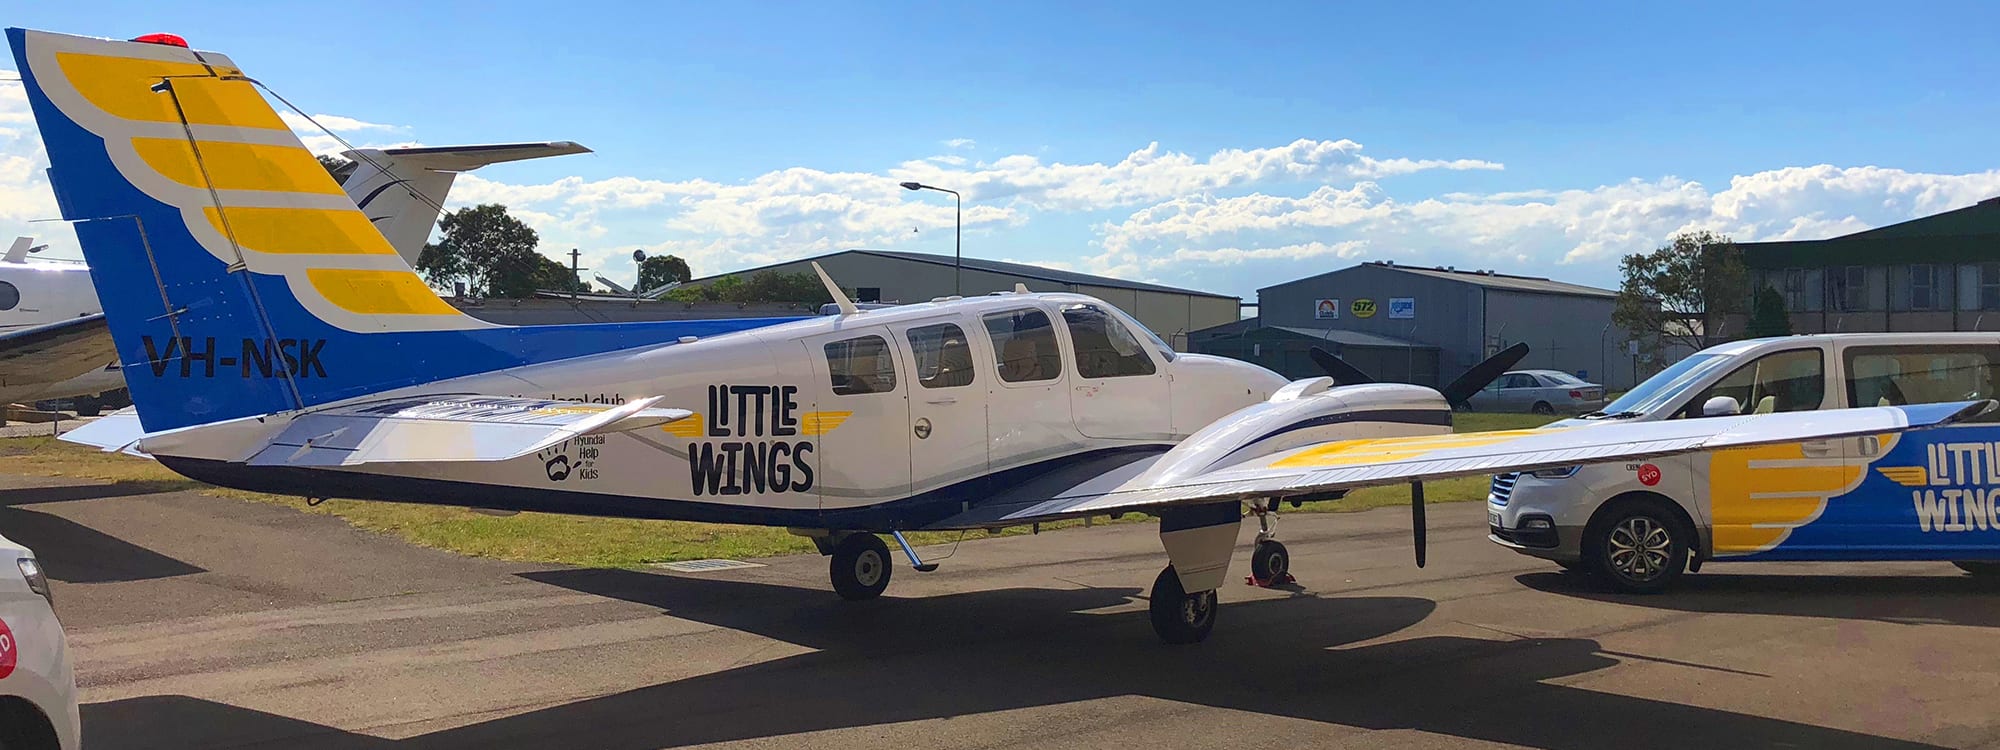 Little Wings is a nonprofit organisation that provides free, professional and safe flight and ground transport services for sick children in rural and regional NSW.